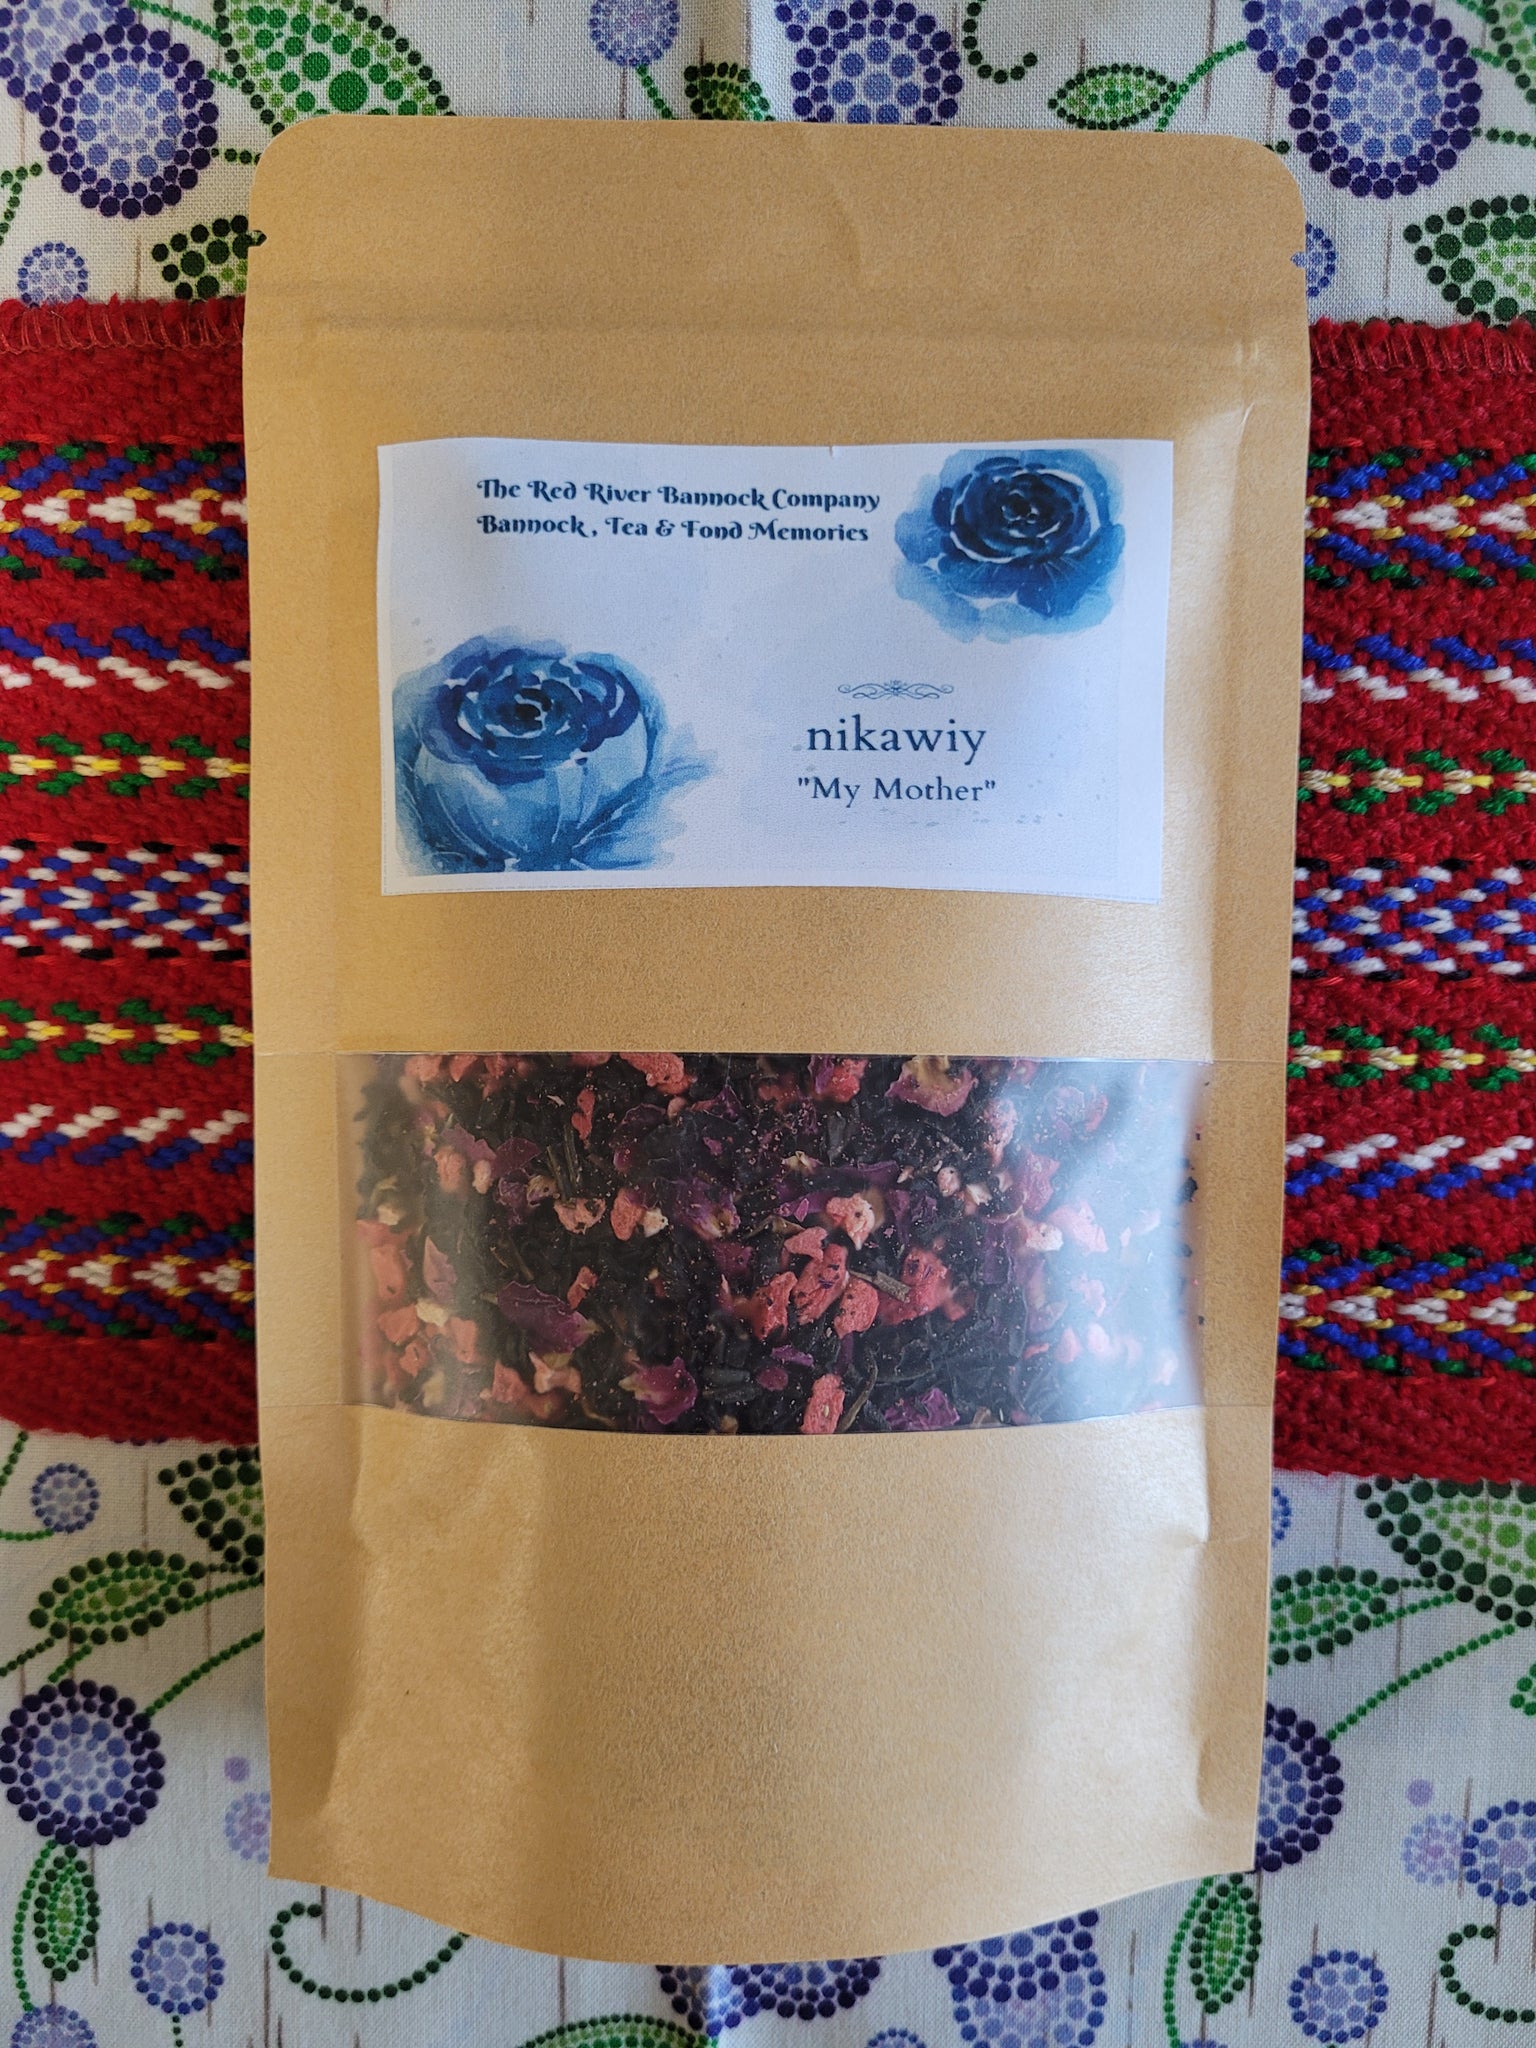 Nikawiy "My Mother" Tea now available